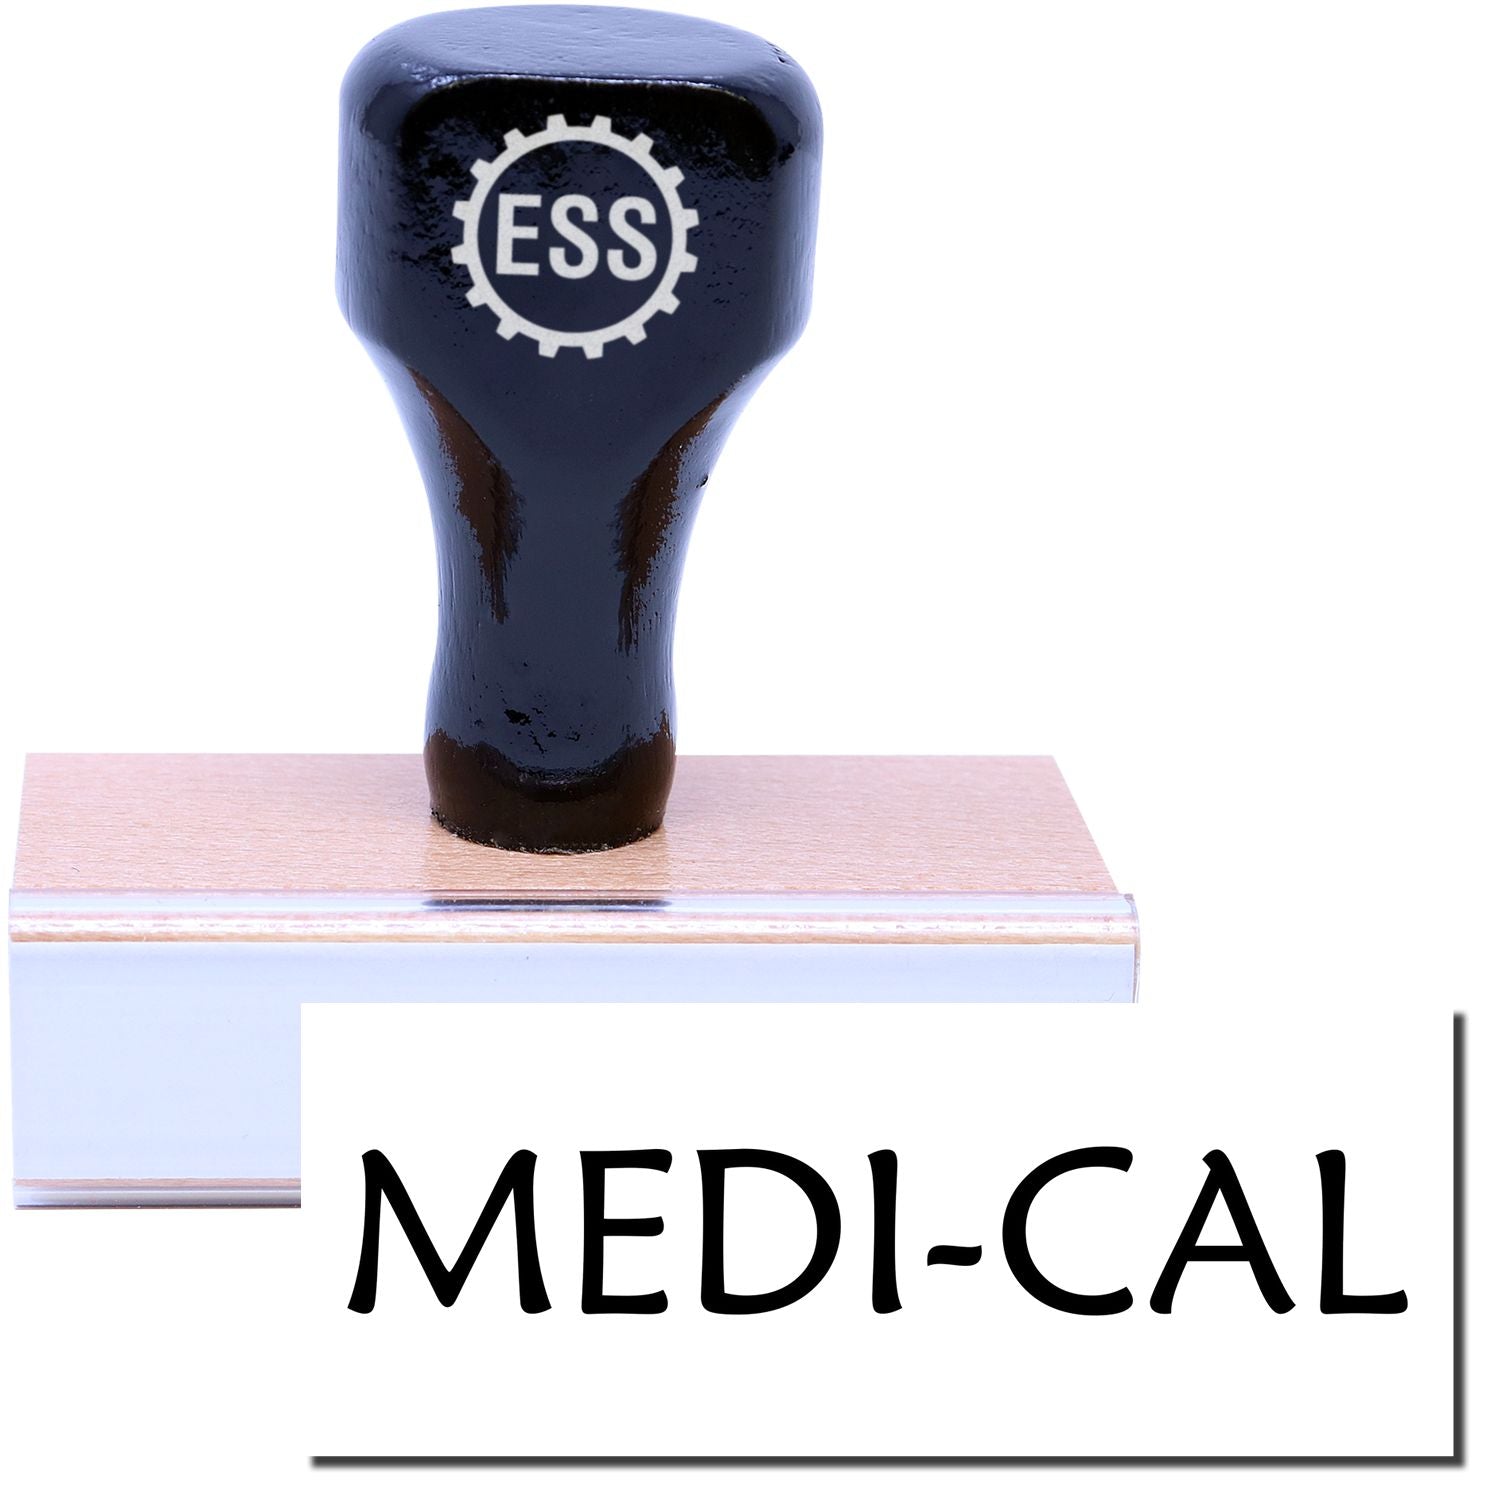 A stock office rubber stamp with a stamped image showing how the text "MEDI-CAL" is displayed after stamping.